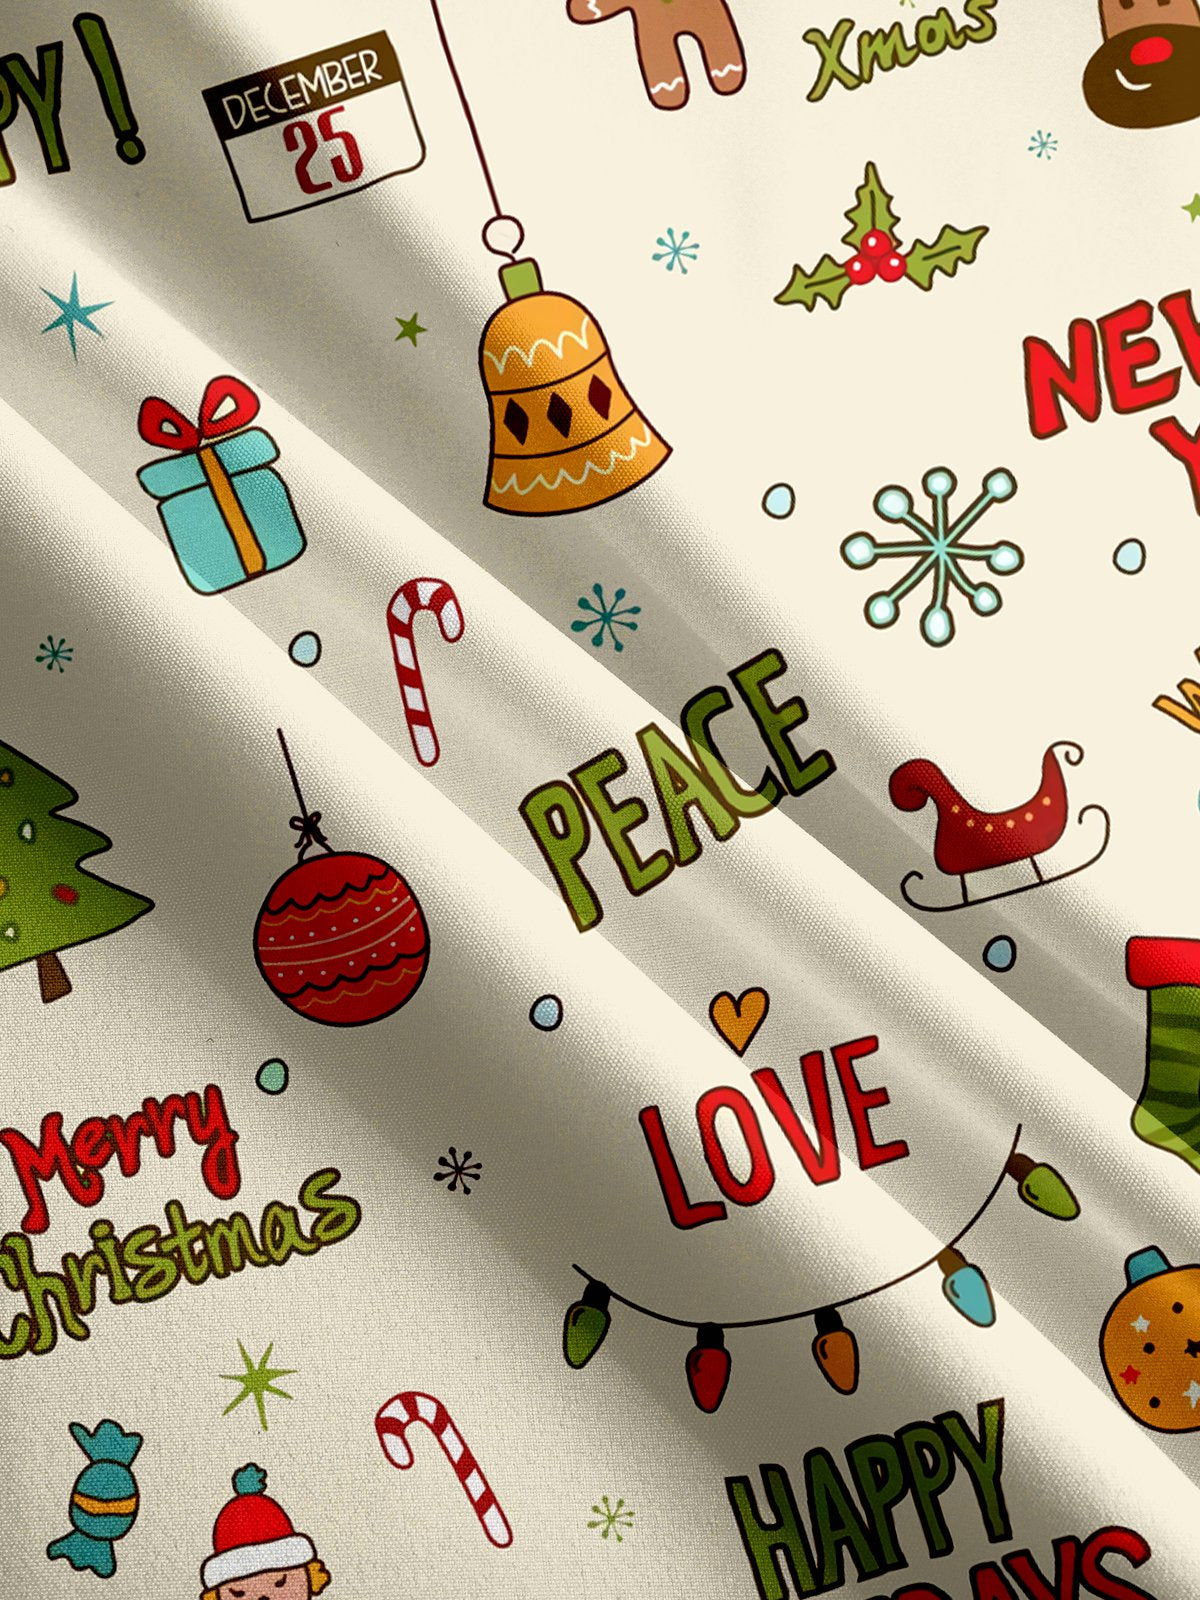 Festive Holiday Gift Graphic Shirt